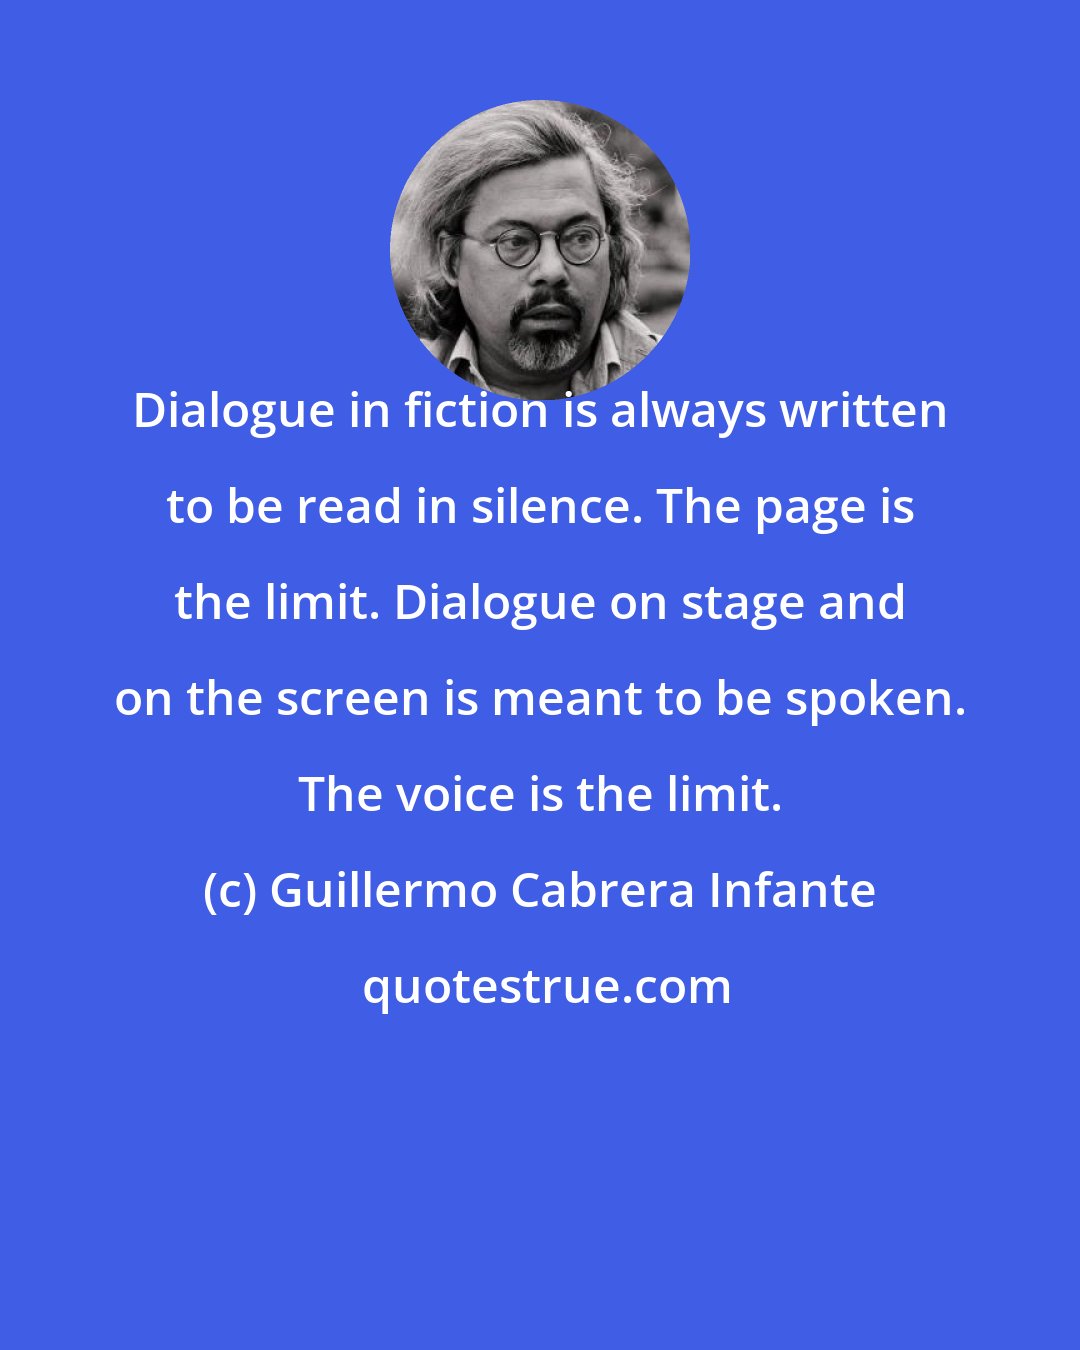 Guillermo Cabrera Infante: Dialogue in fiction is always written to be read in silence. The page is the limit. Dialogue on stage and on the screen is meant to be spoken. The voice is the limit.